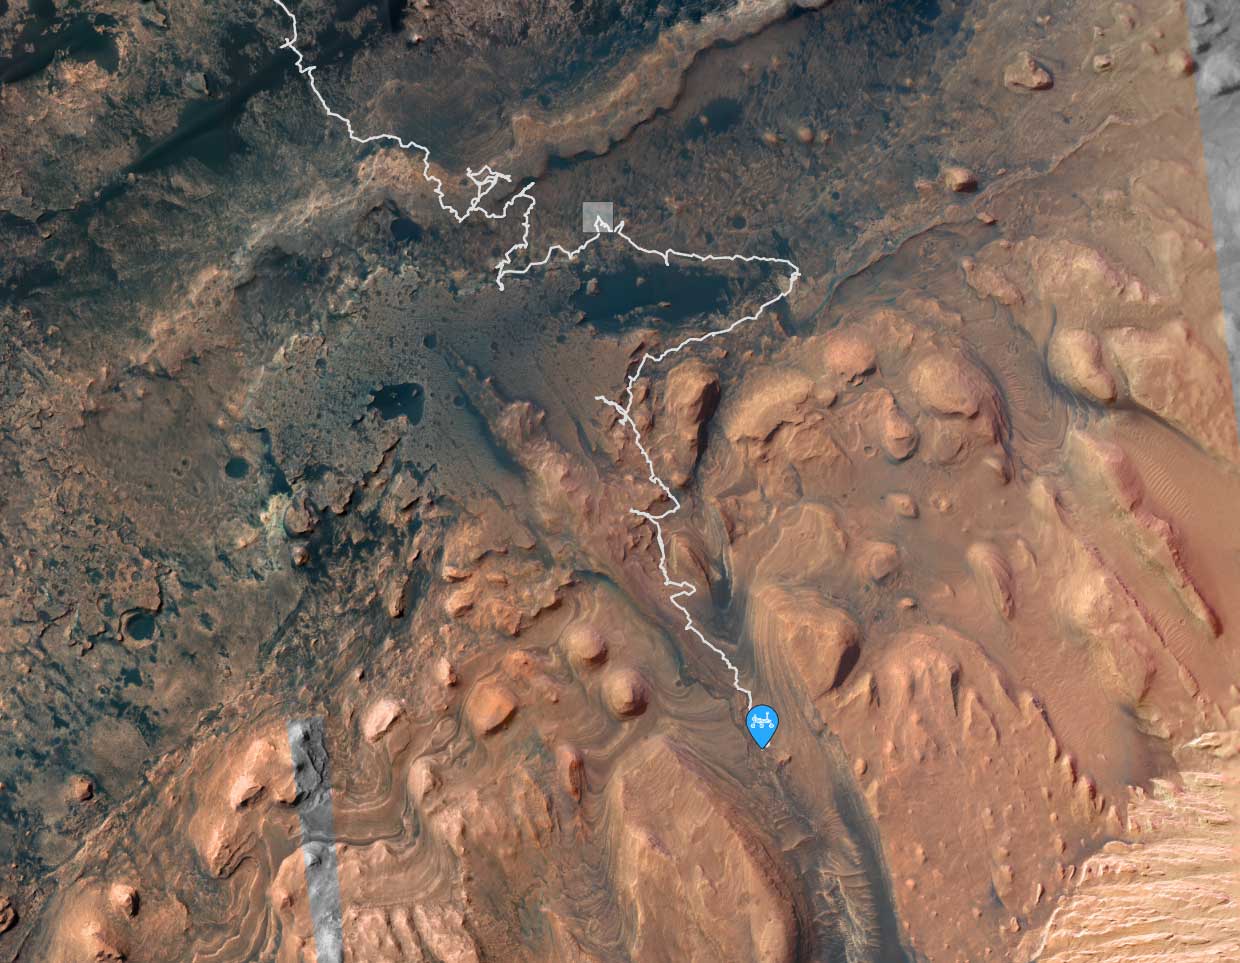 Location map of Curiosity and it's drive path